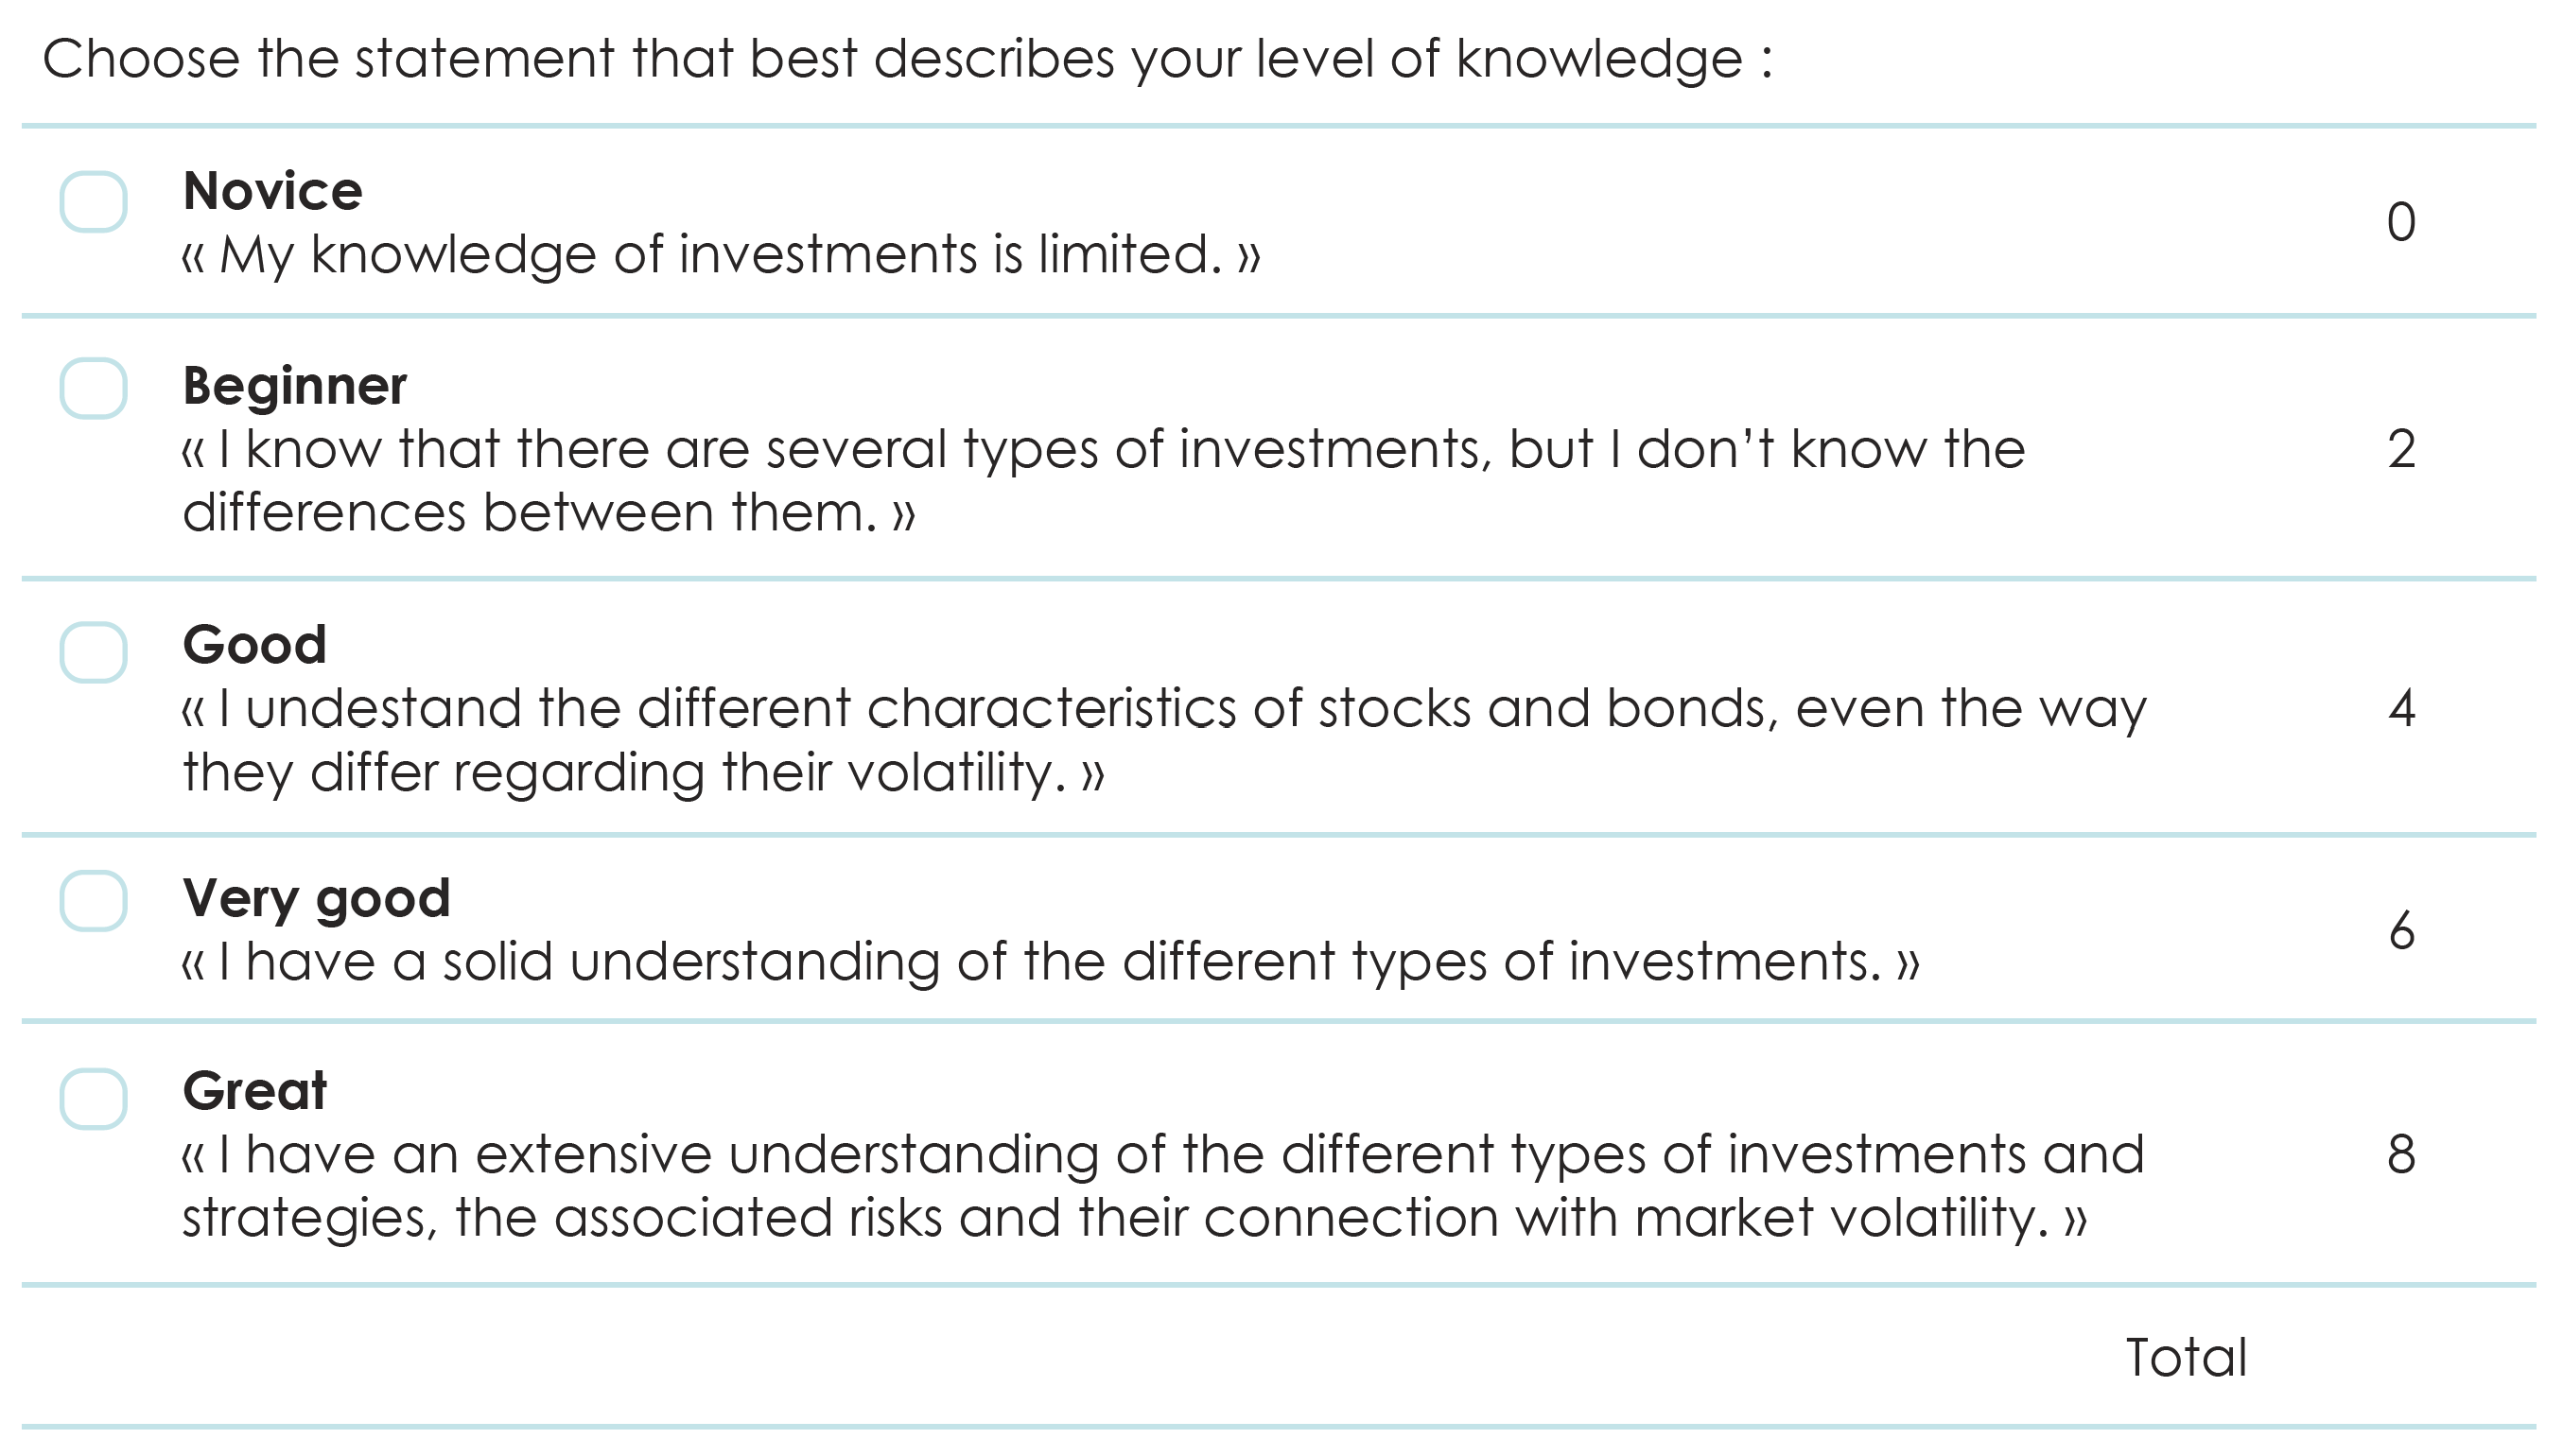 Second example of a question to determine the investor profile.  